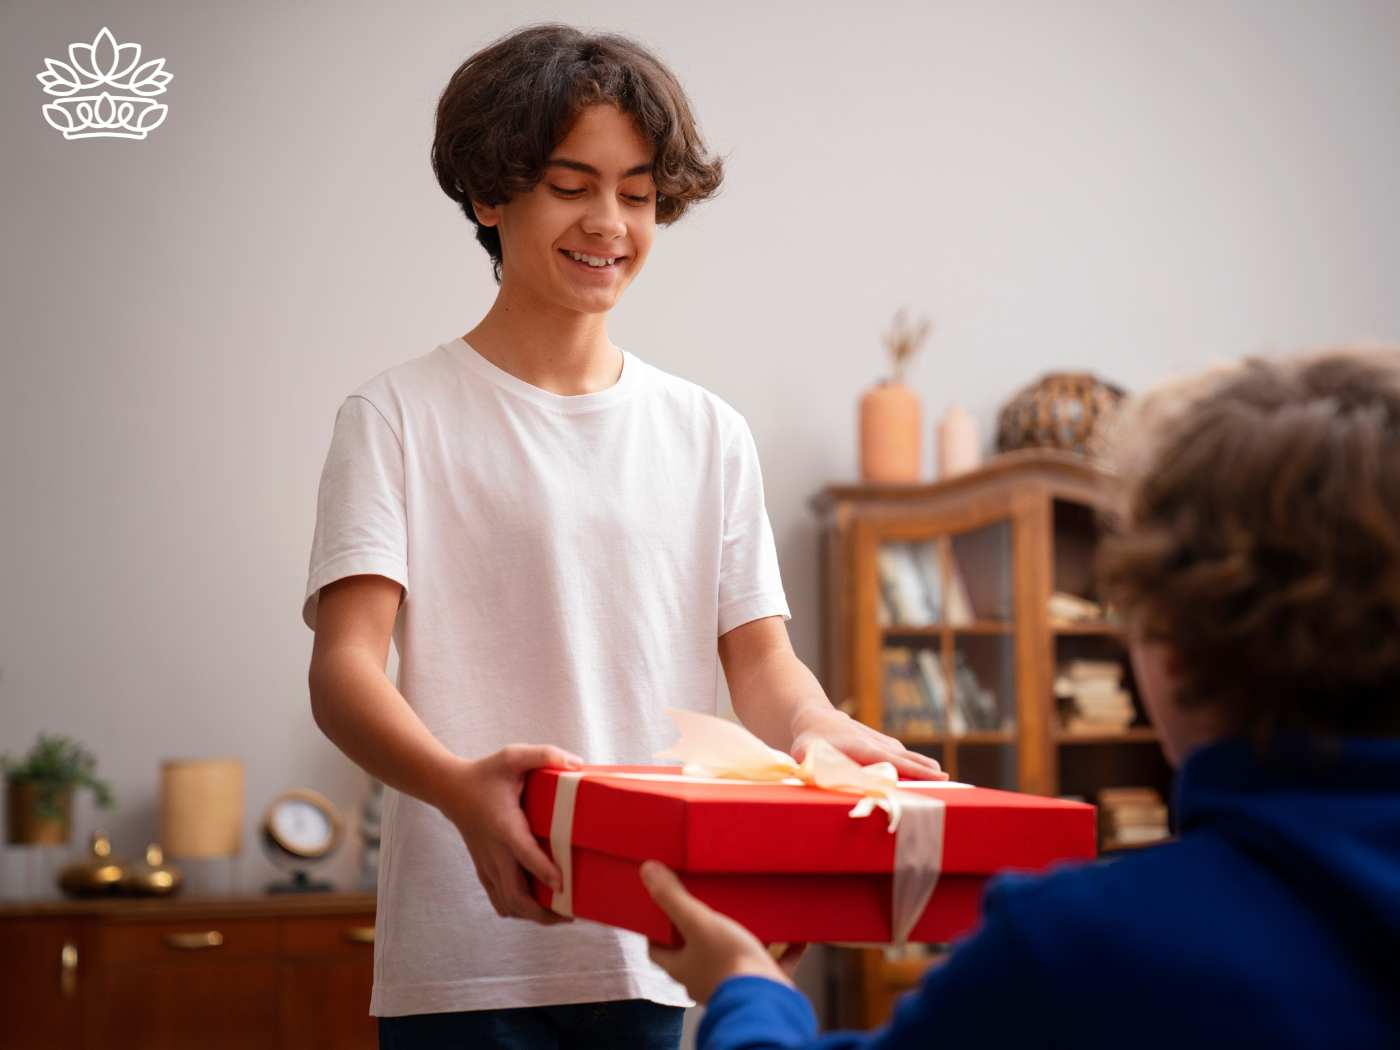 Smiling young boy giving a red gift box to another person, capturing a moment of joy and generosity, from the Gift Boxes by Type Collection at Fabulous Flowers and Gifts.